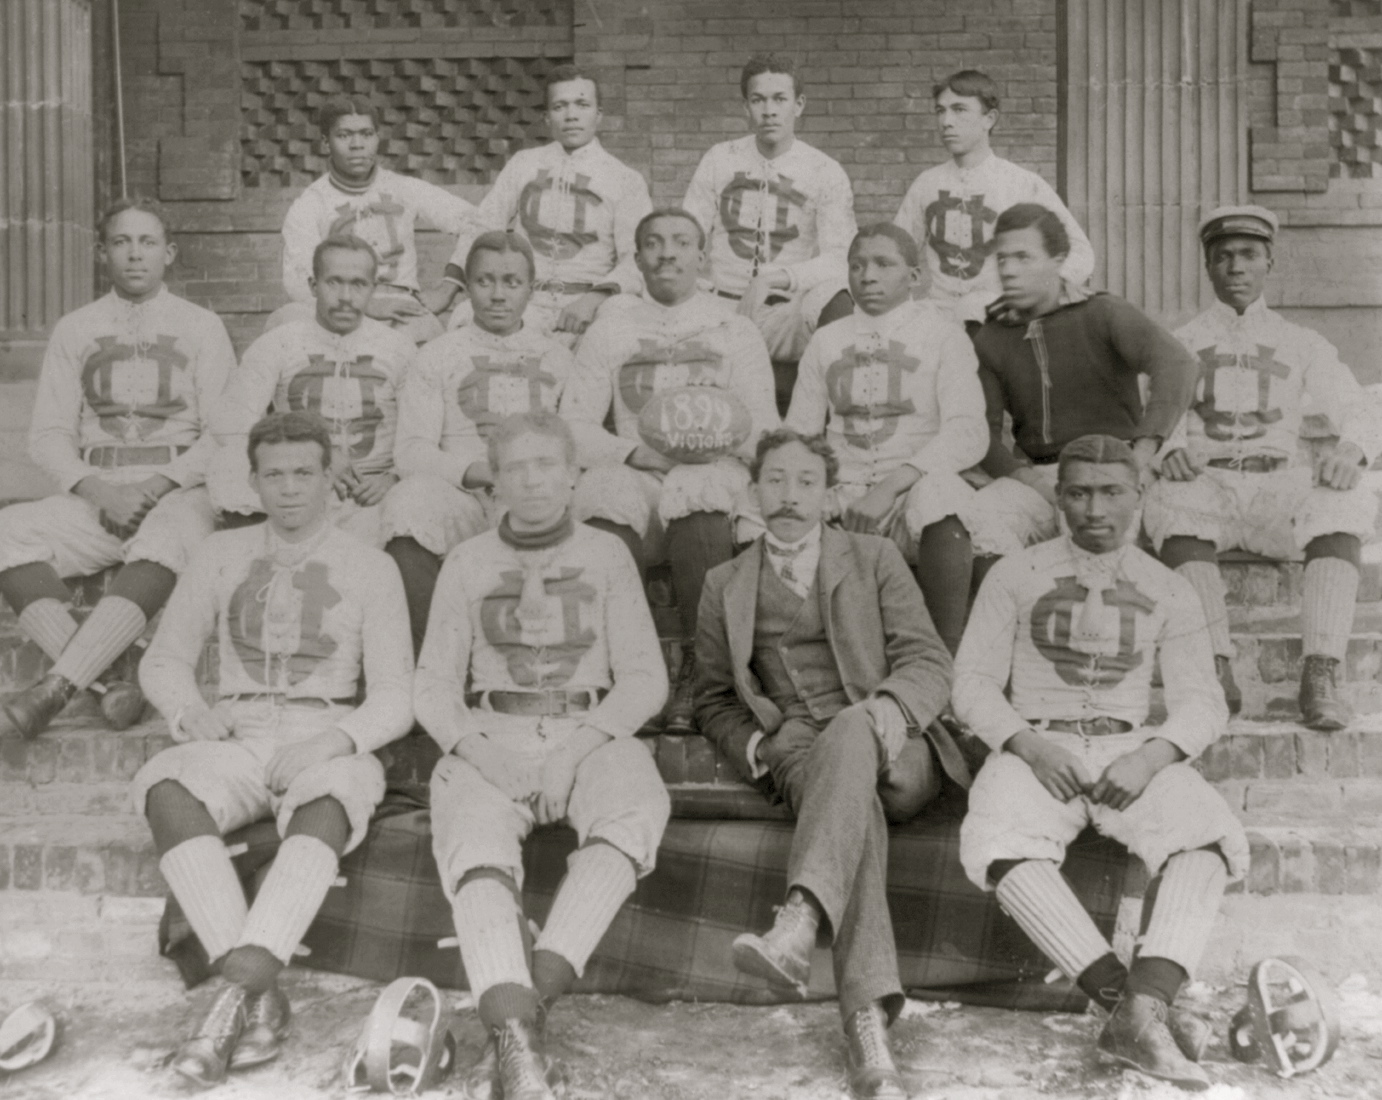 An old group photo of an HBCU athletic team